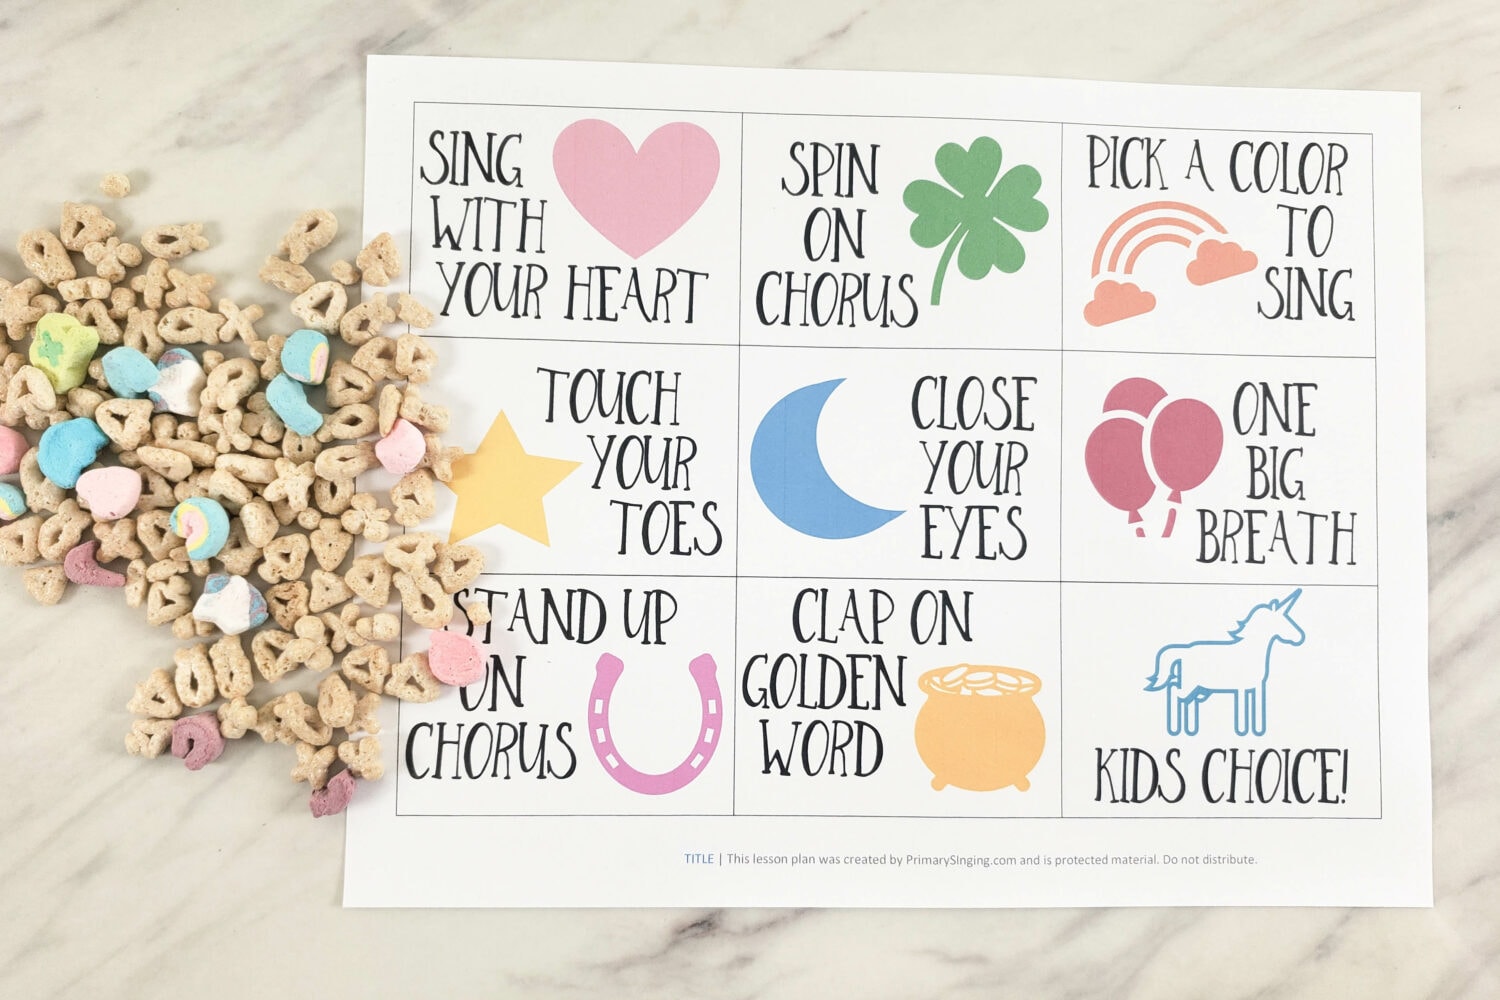 St Patrick's Day Lucky Charms Review Game Singing Time Ideas for LDS Primary Music Leaders